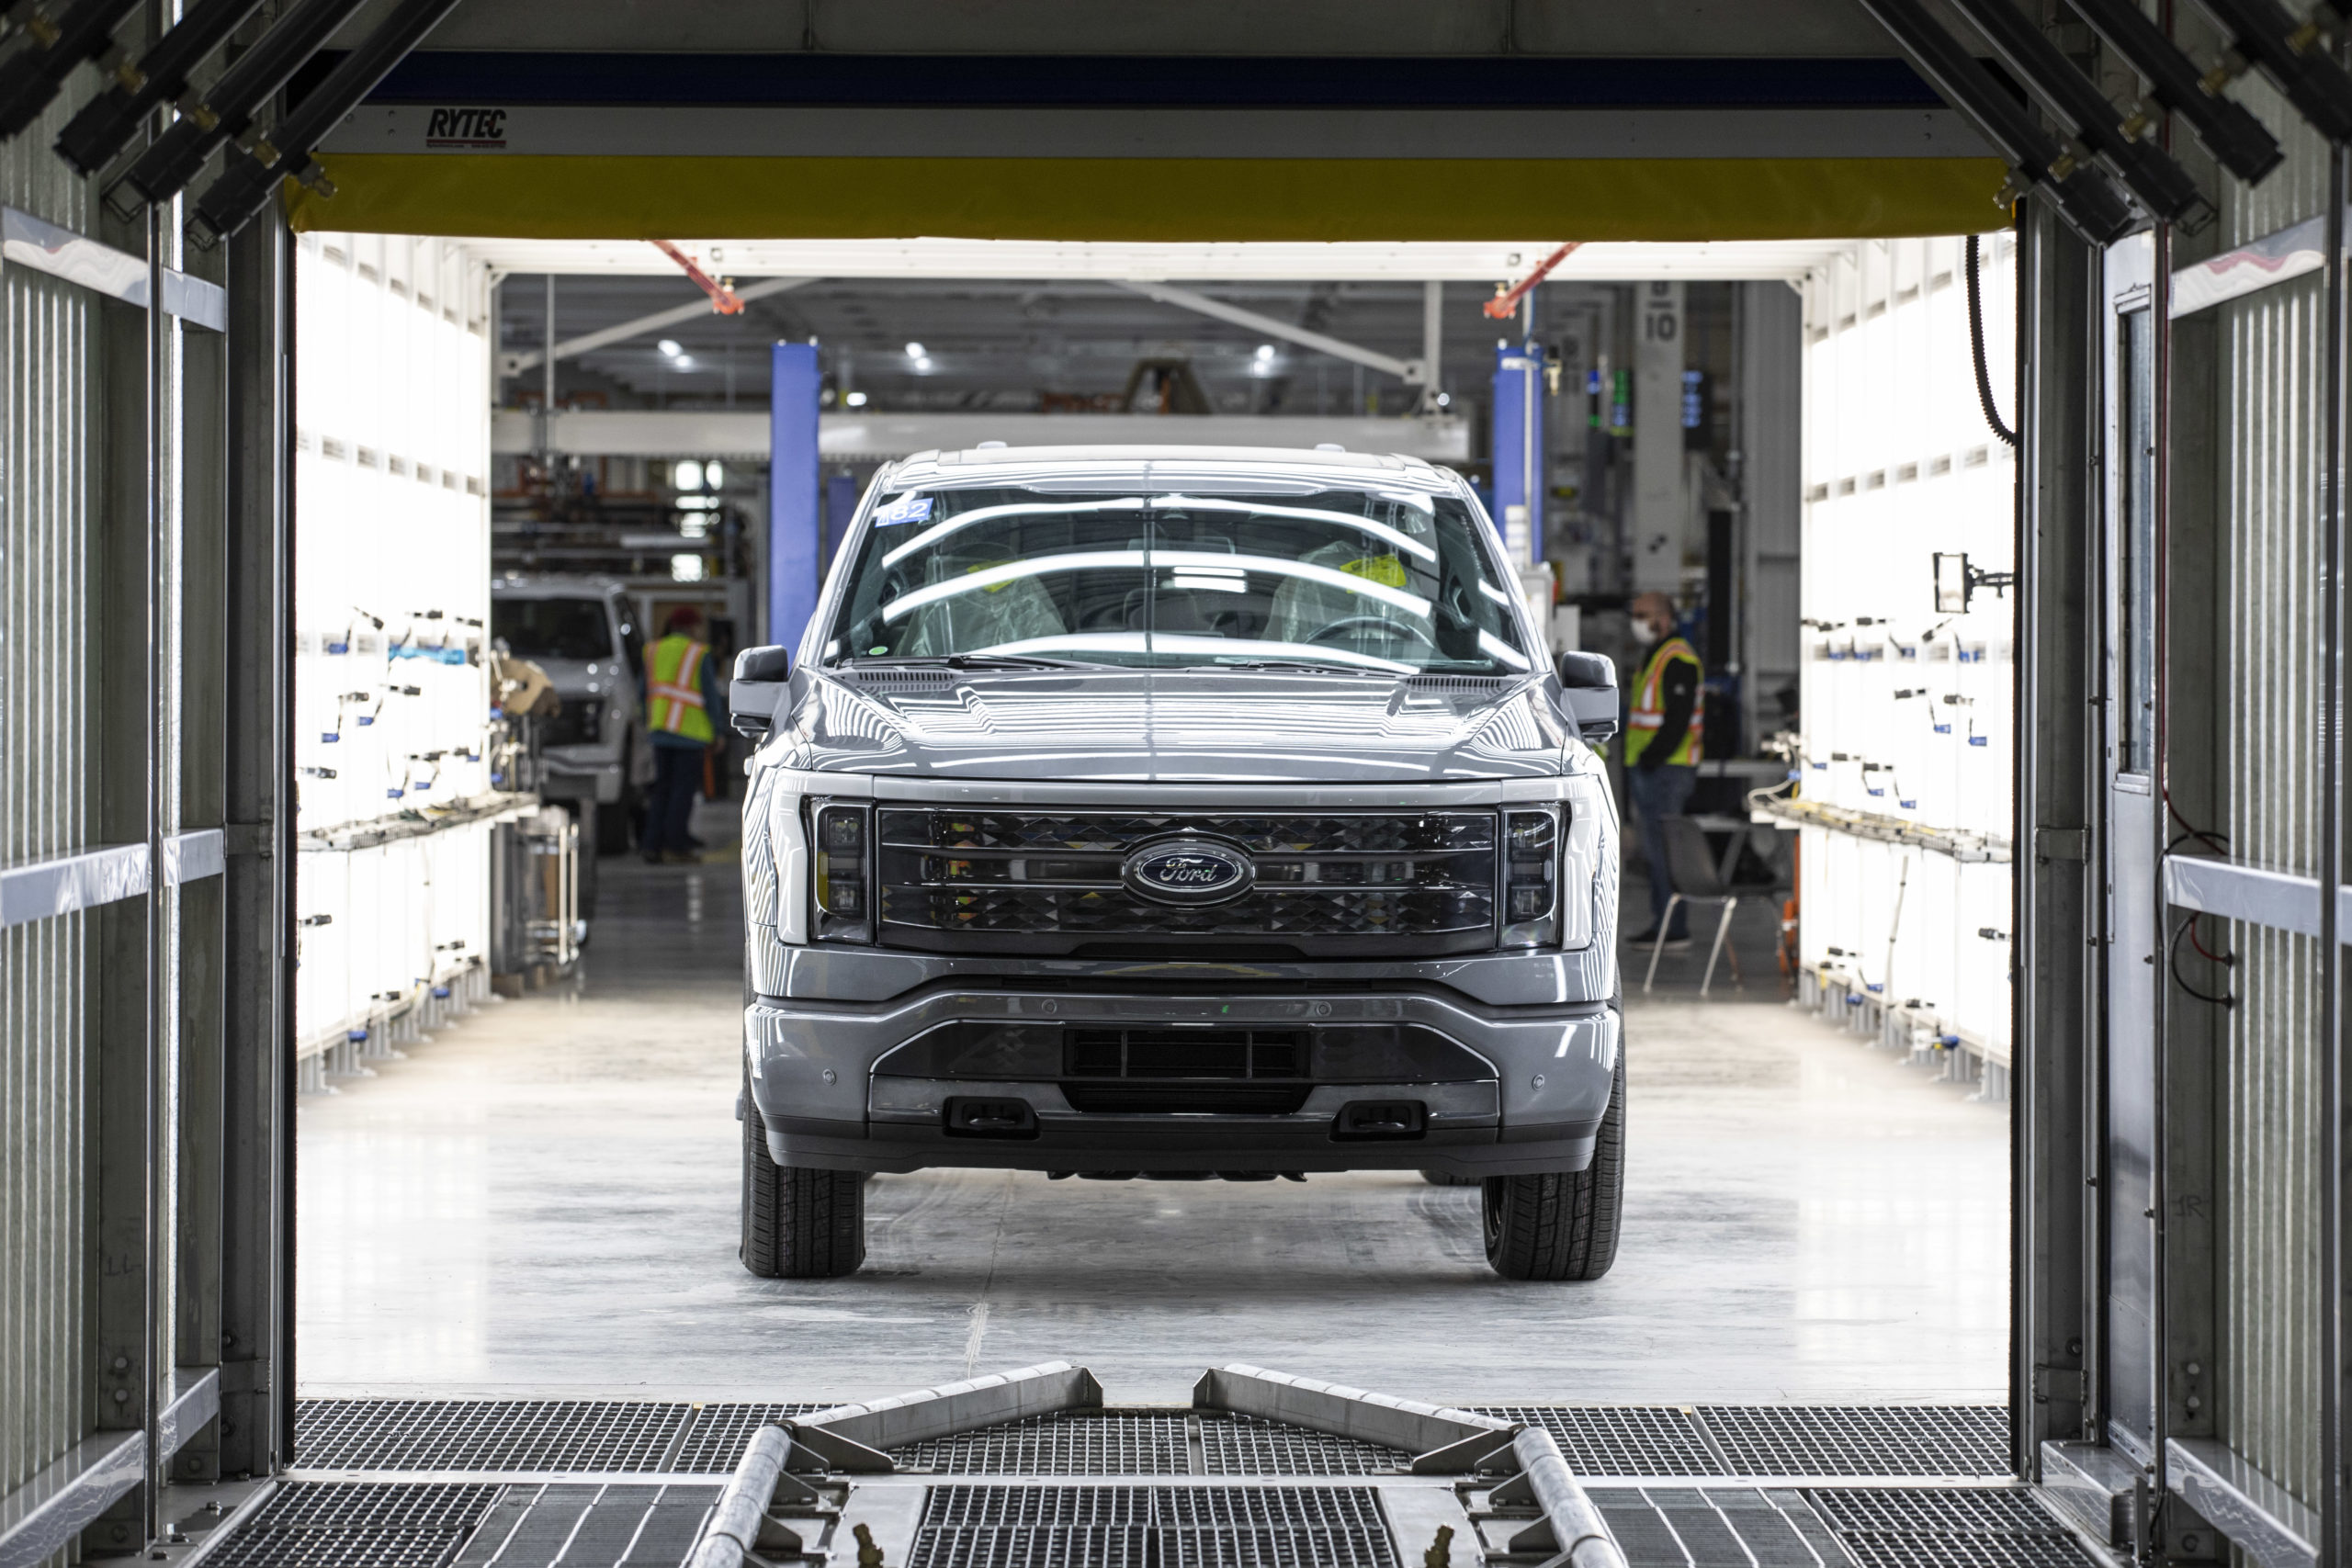 Ford is planning to nearly double production capacity of the all-electric F-150 Lightning™ pickup to 150,000 vehicles per year at the Rouge Electric Vehicle Center in Dearborn, Michigan, to meet soaring customer demand